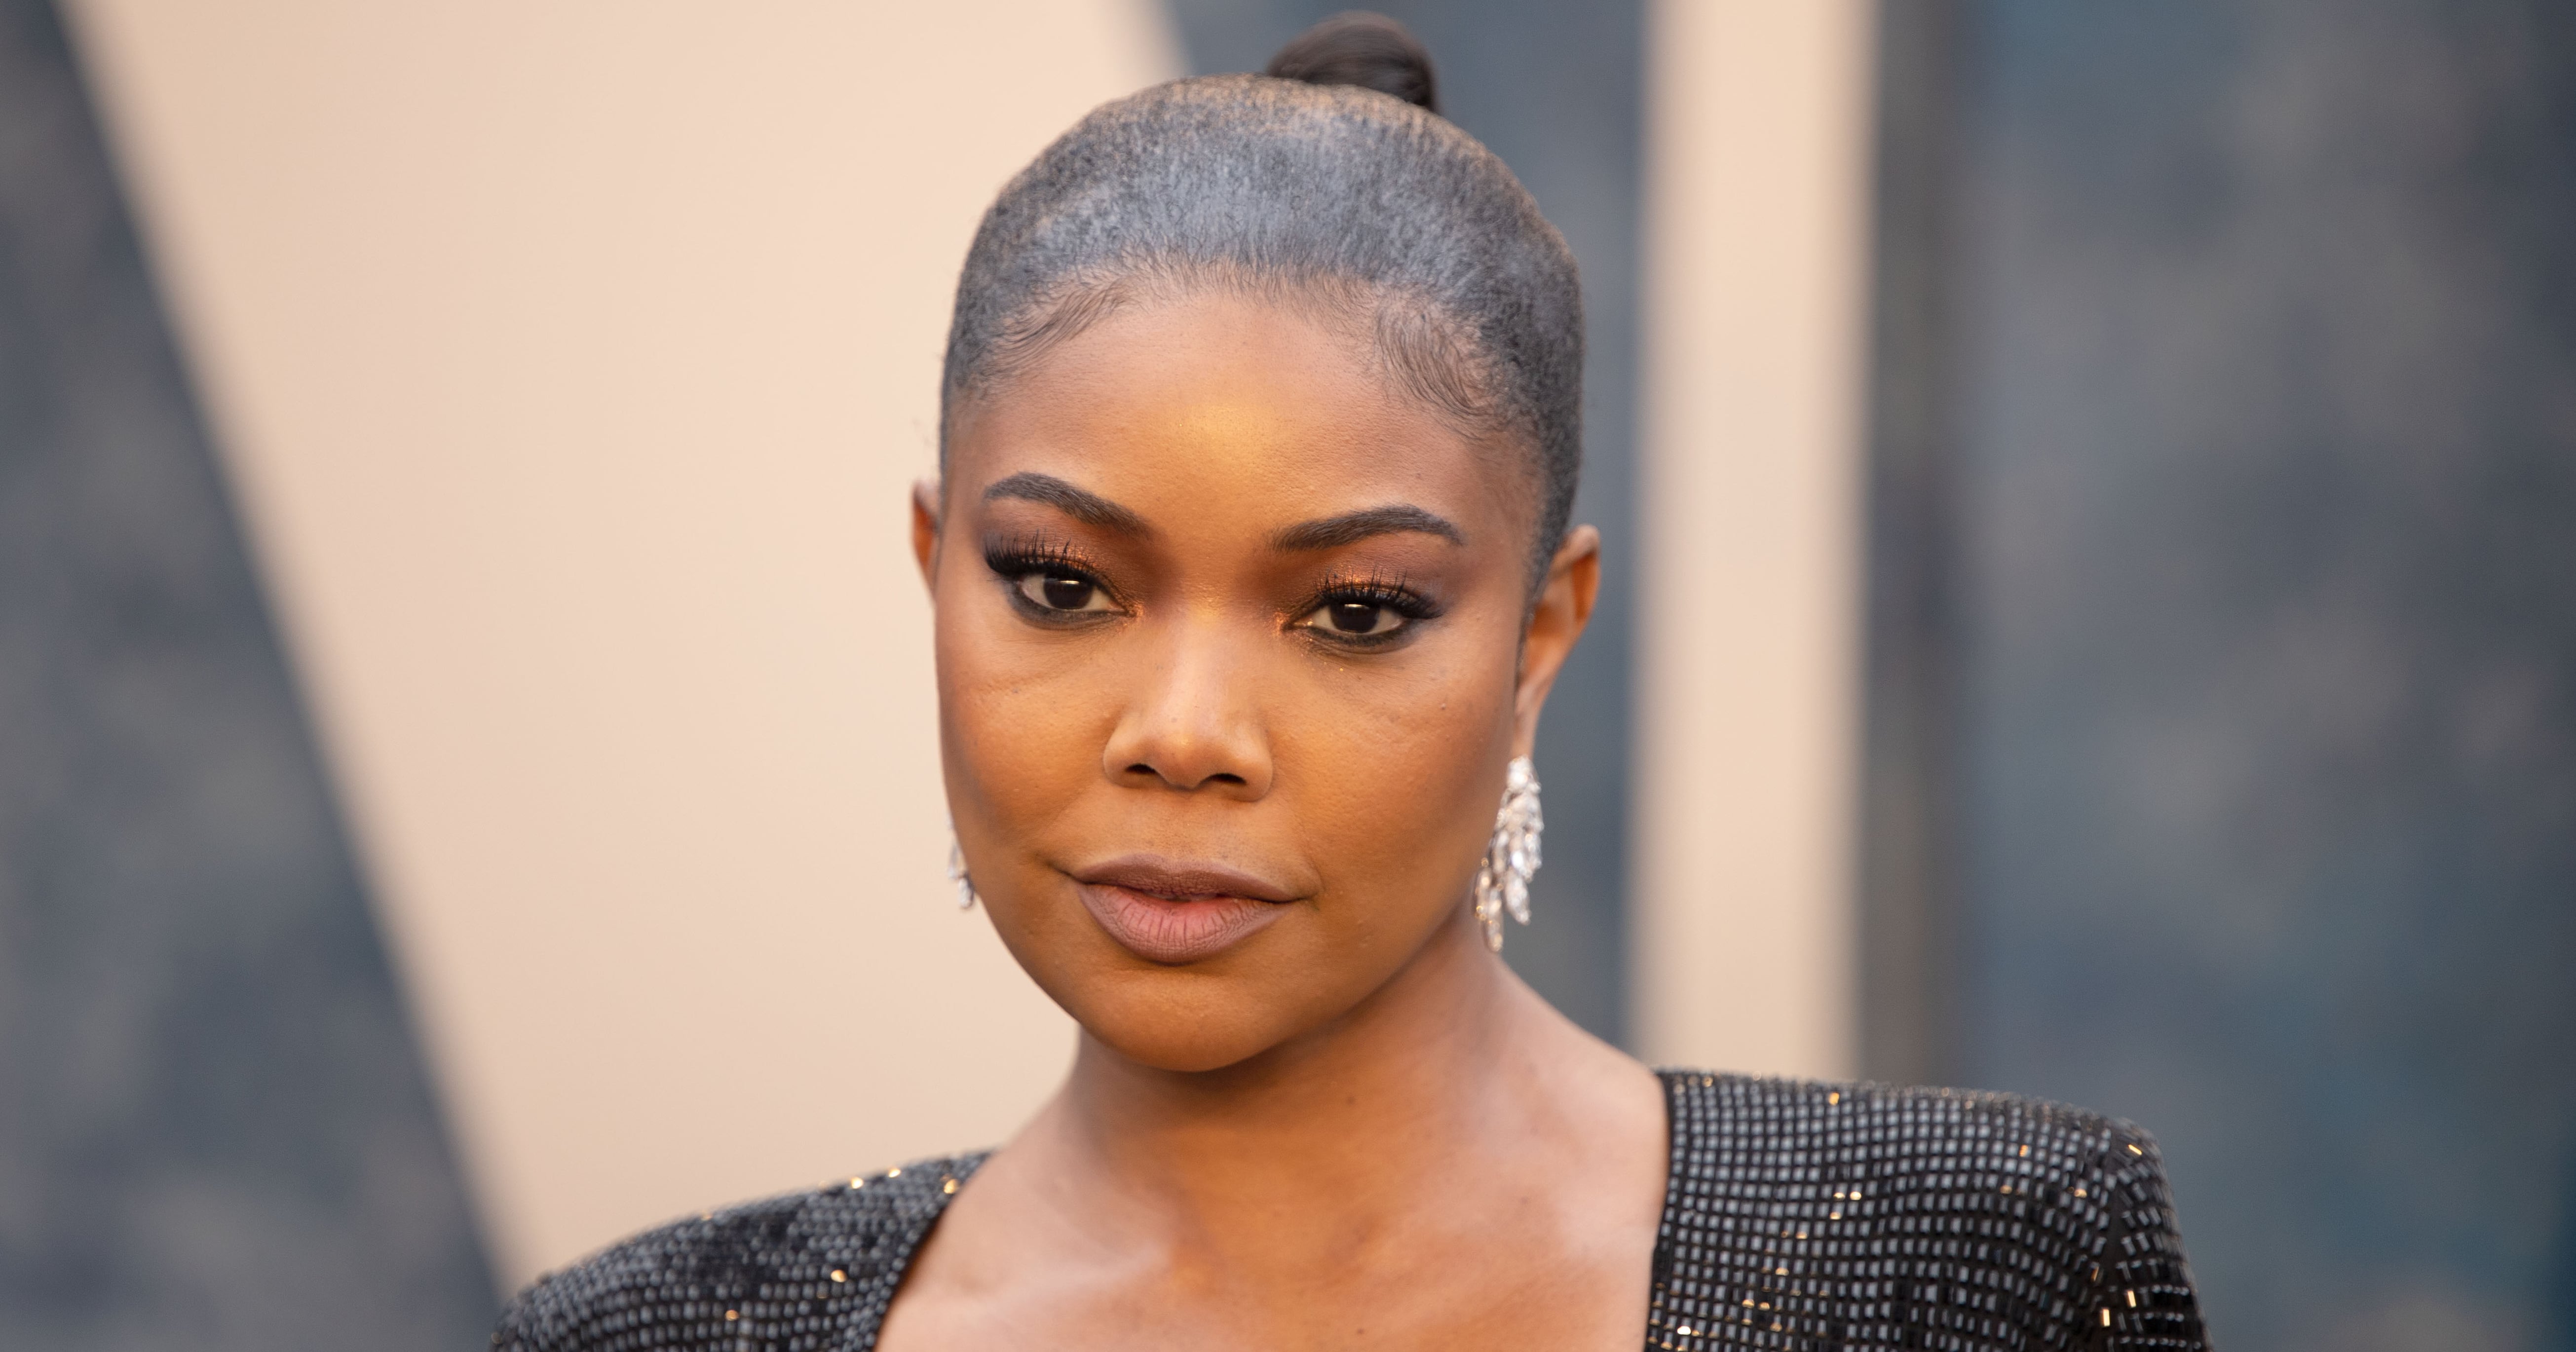 Women’s Healthcare Needs to Do Better — Gabrielle Union Has Some Ideas